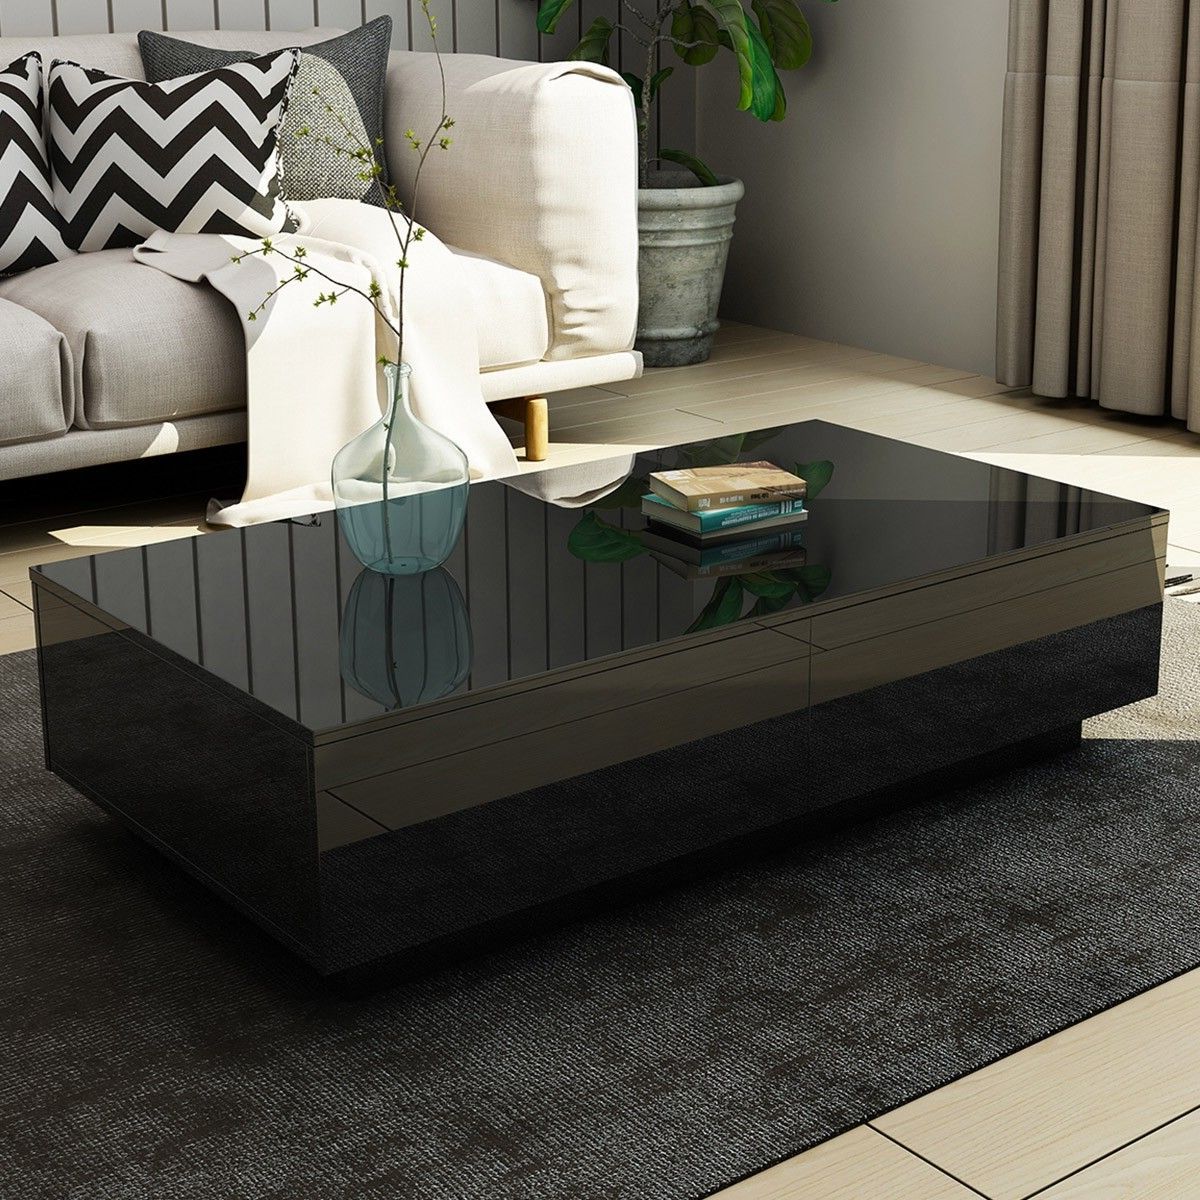 Black Coffee Tables Intended For Trendy New 4 Drawer Coffee Table Wood Living Room Furniture High (View 15 of 20)